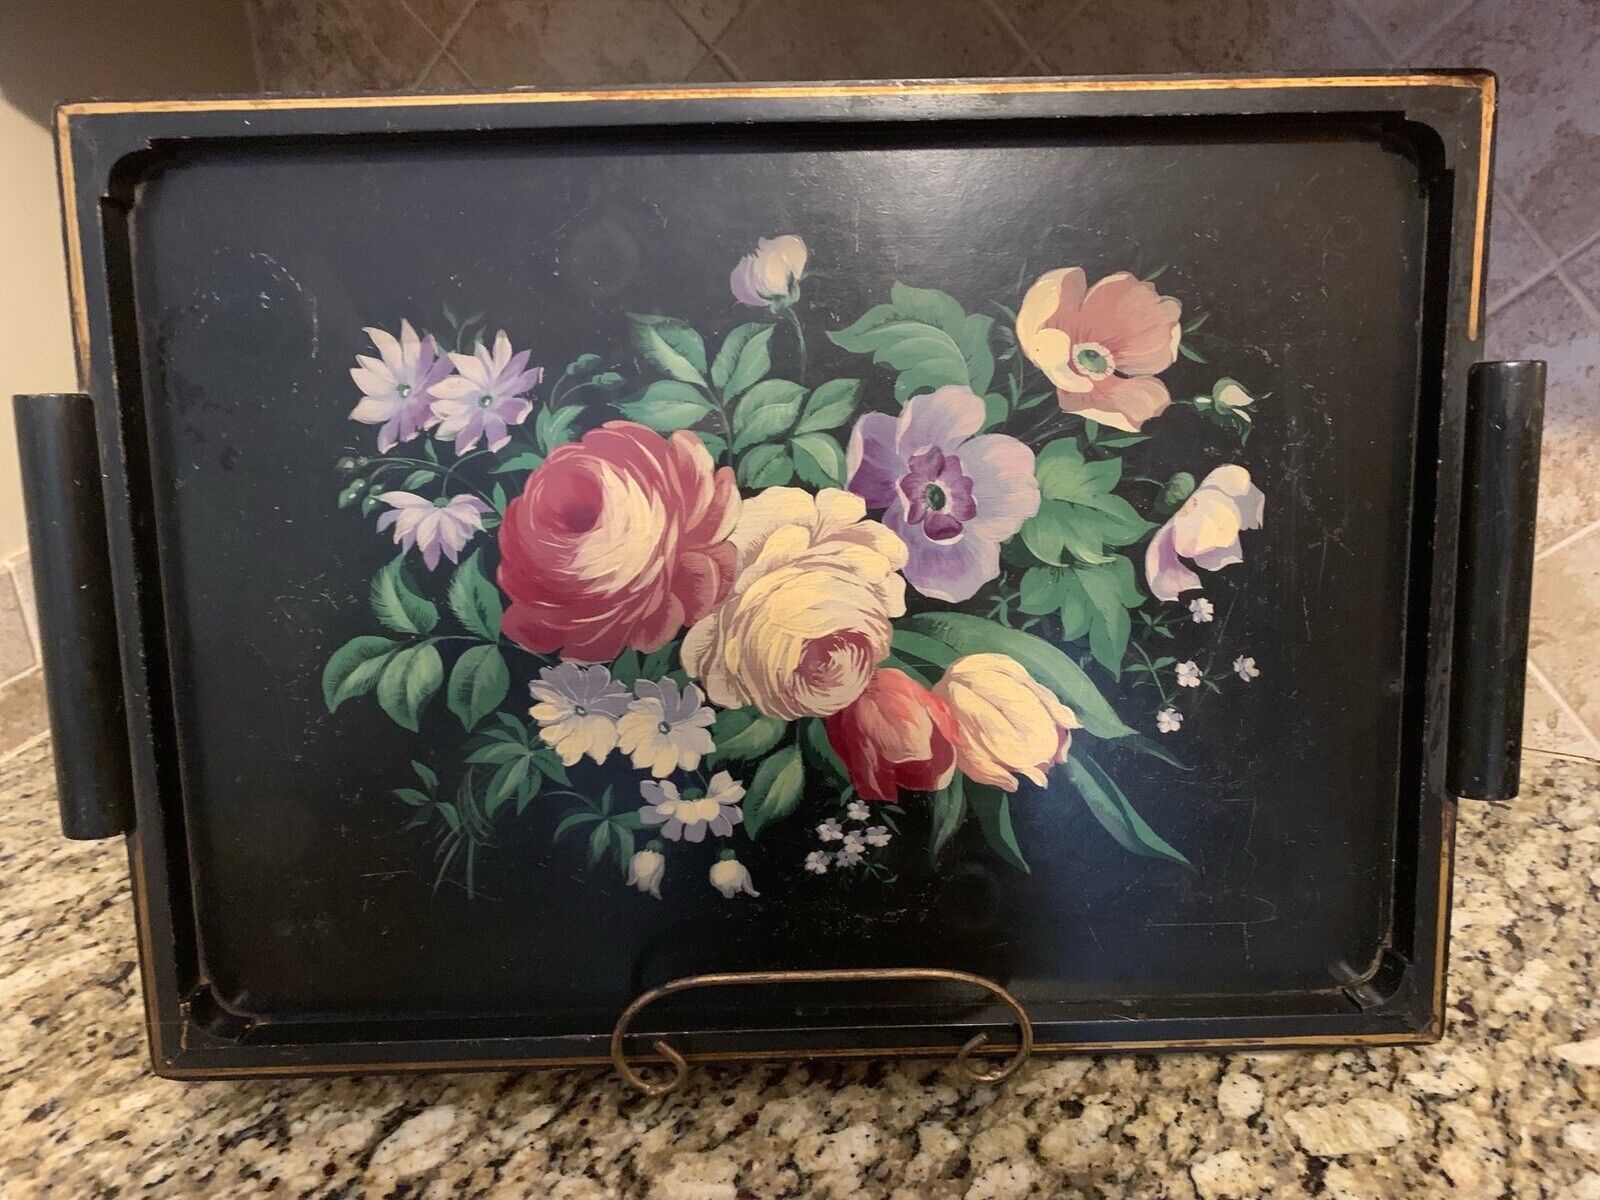 Vintage Hand Painted Floral Wooden Tole Black Serving Tray 22 X 16 X 1